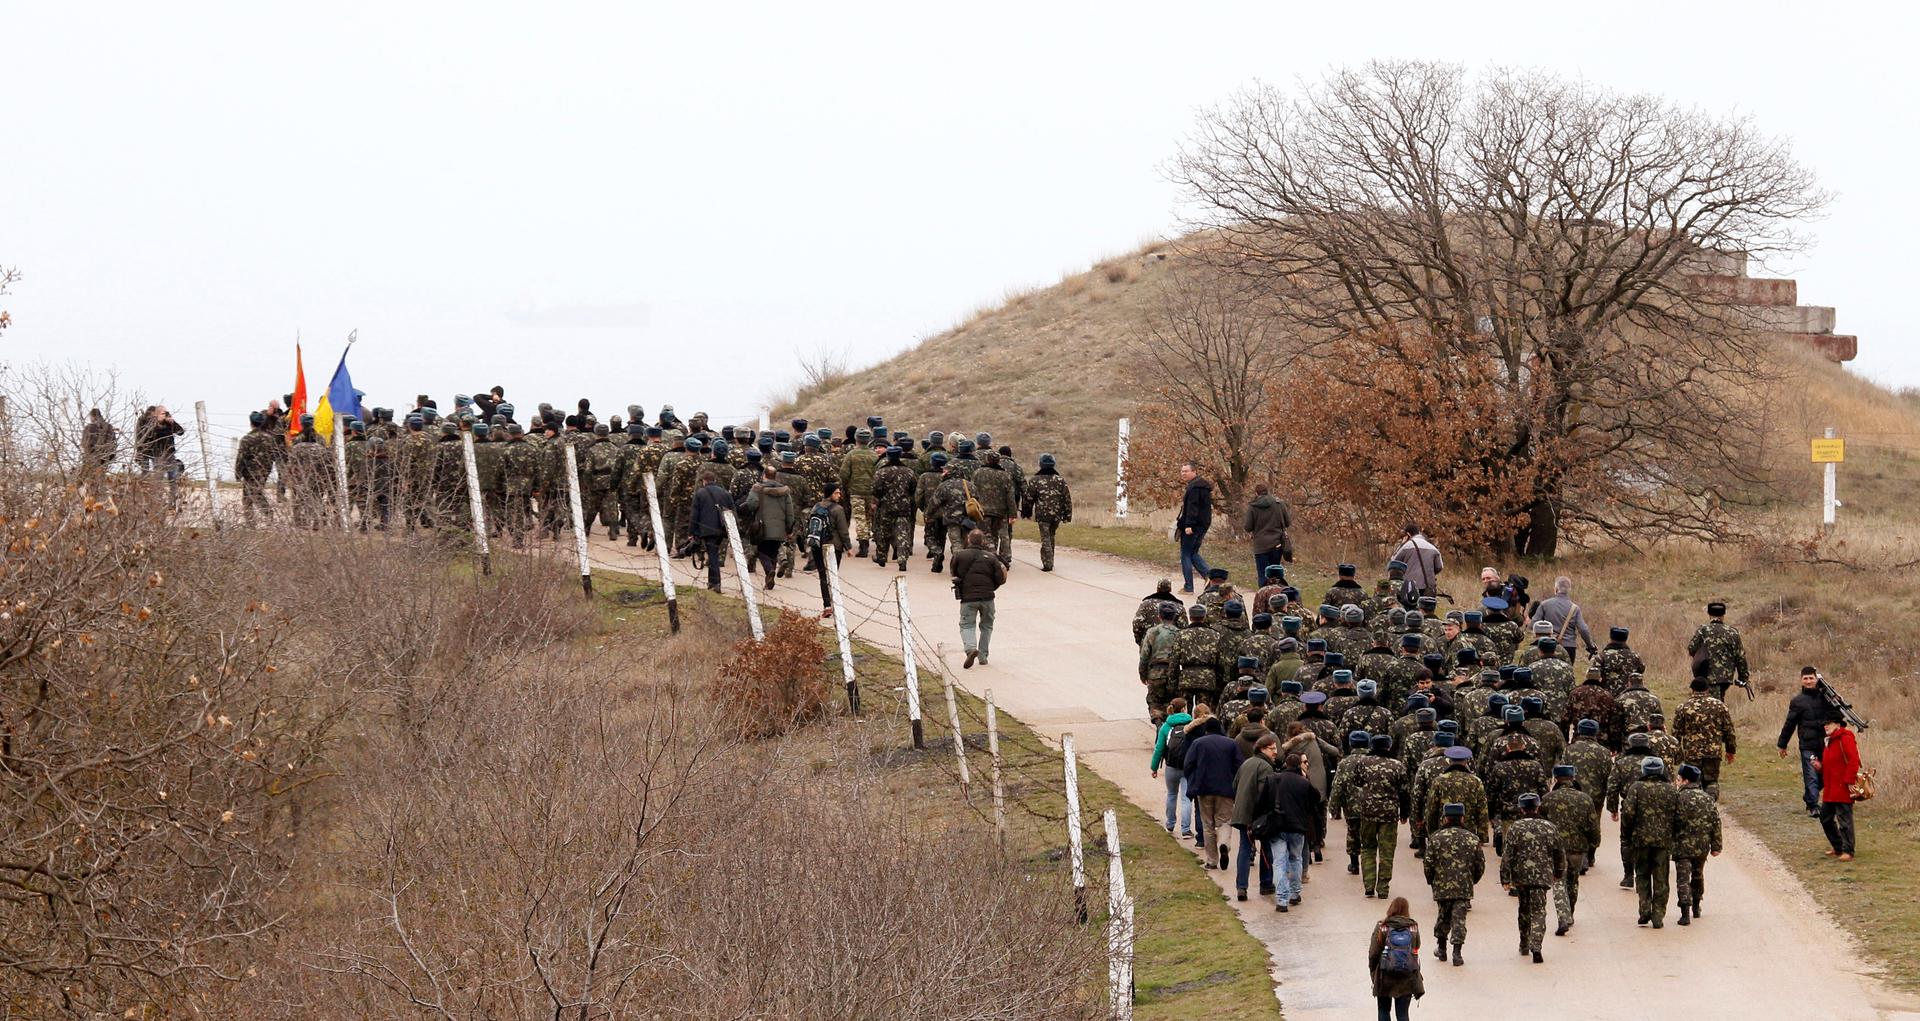 Ukrainian servicemen march away from the Belbek Sevastopol International Airport in the Crimea region on March 4, 2014. A column of unarmed Ukrainian servicemen arrived at the base for negotiations with Russian troops on Tuesday, local media reported. The